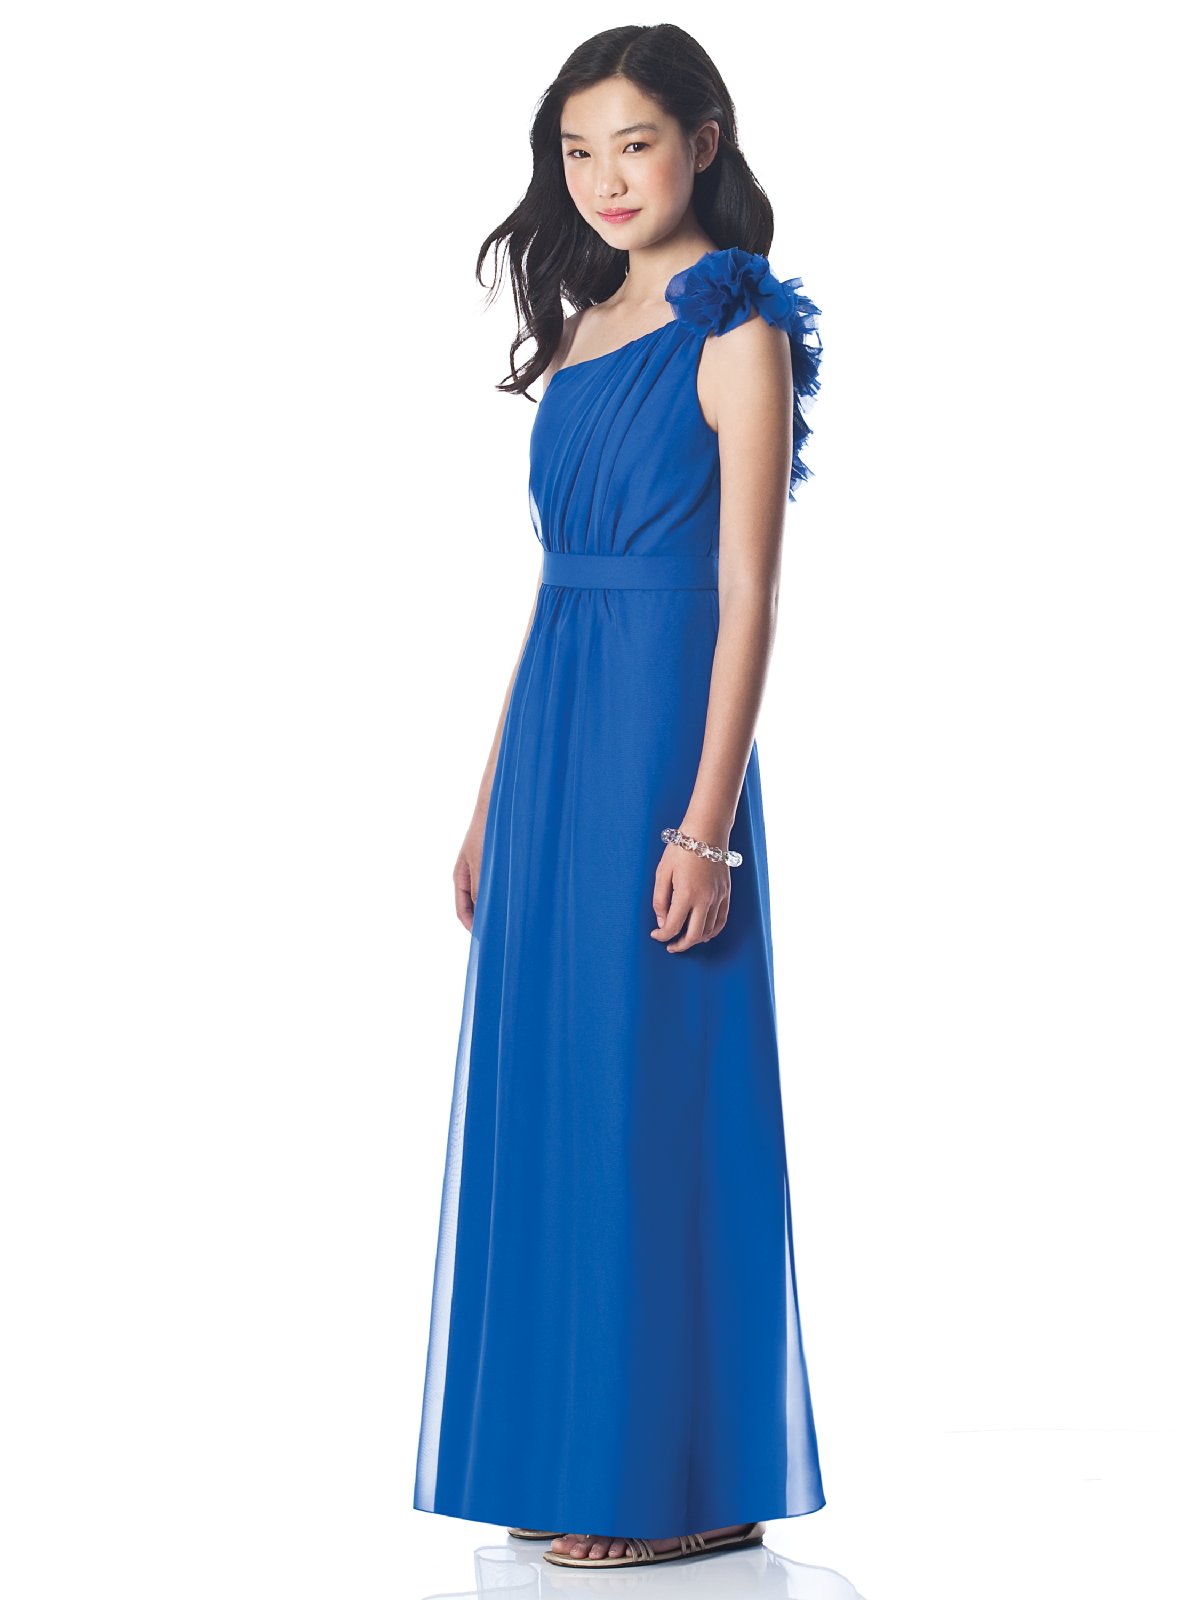 Royal Blue Column One Shoulder Low Back Ankle Length Draped Prom Dresses With Flowers 